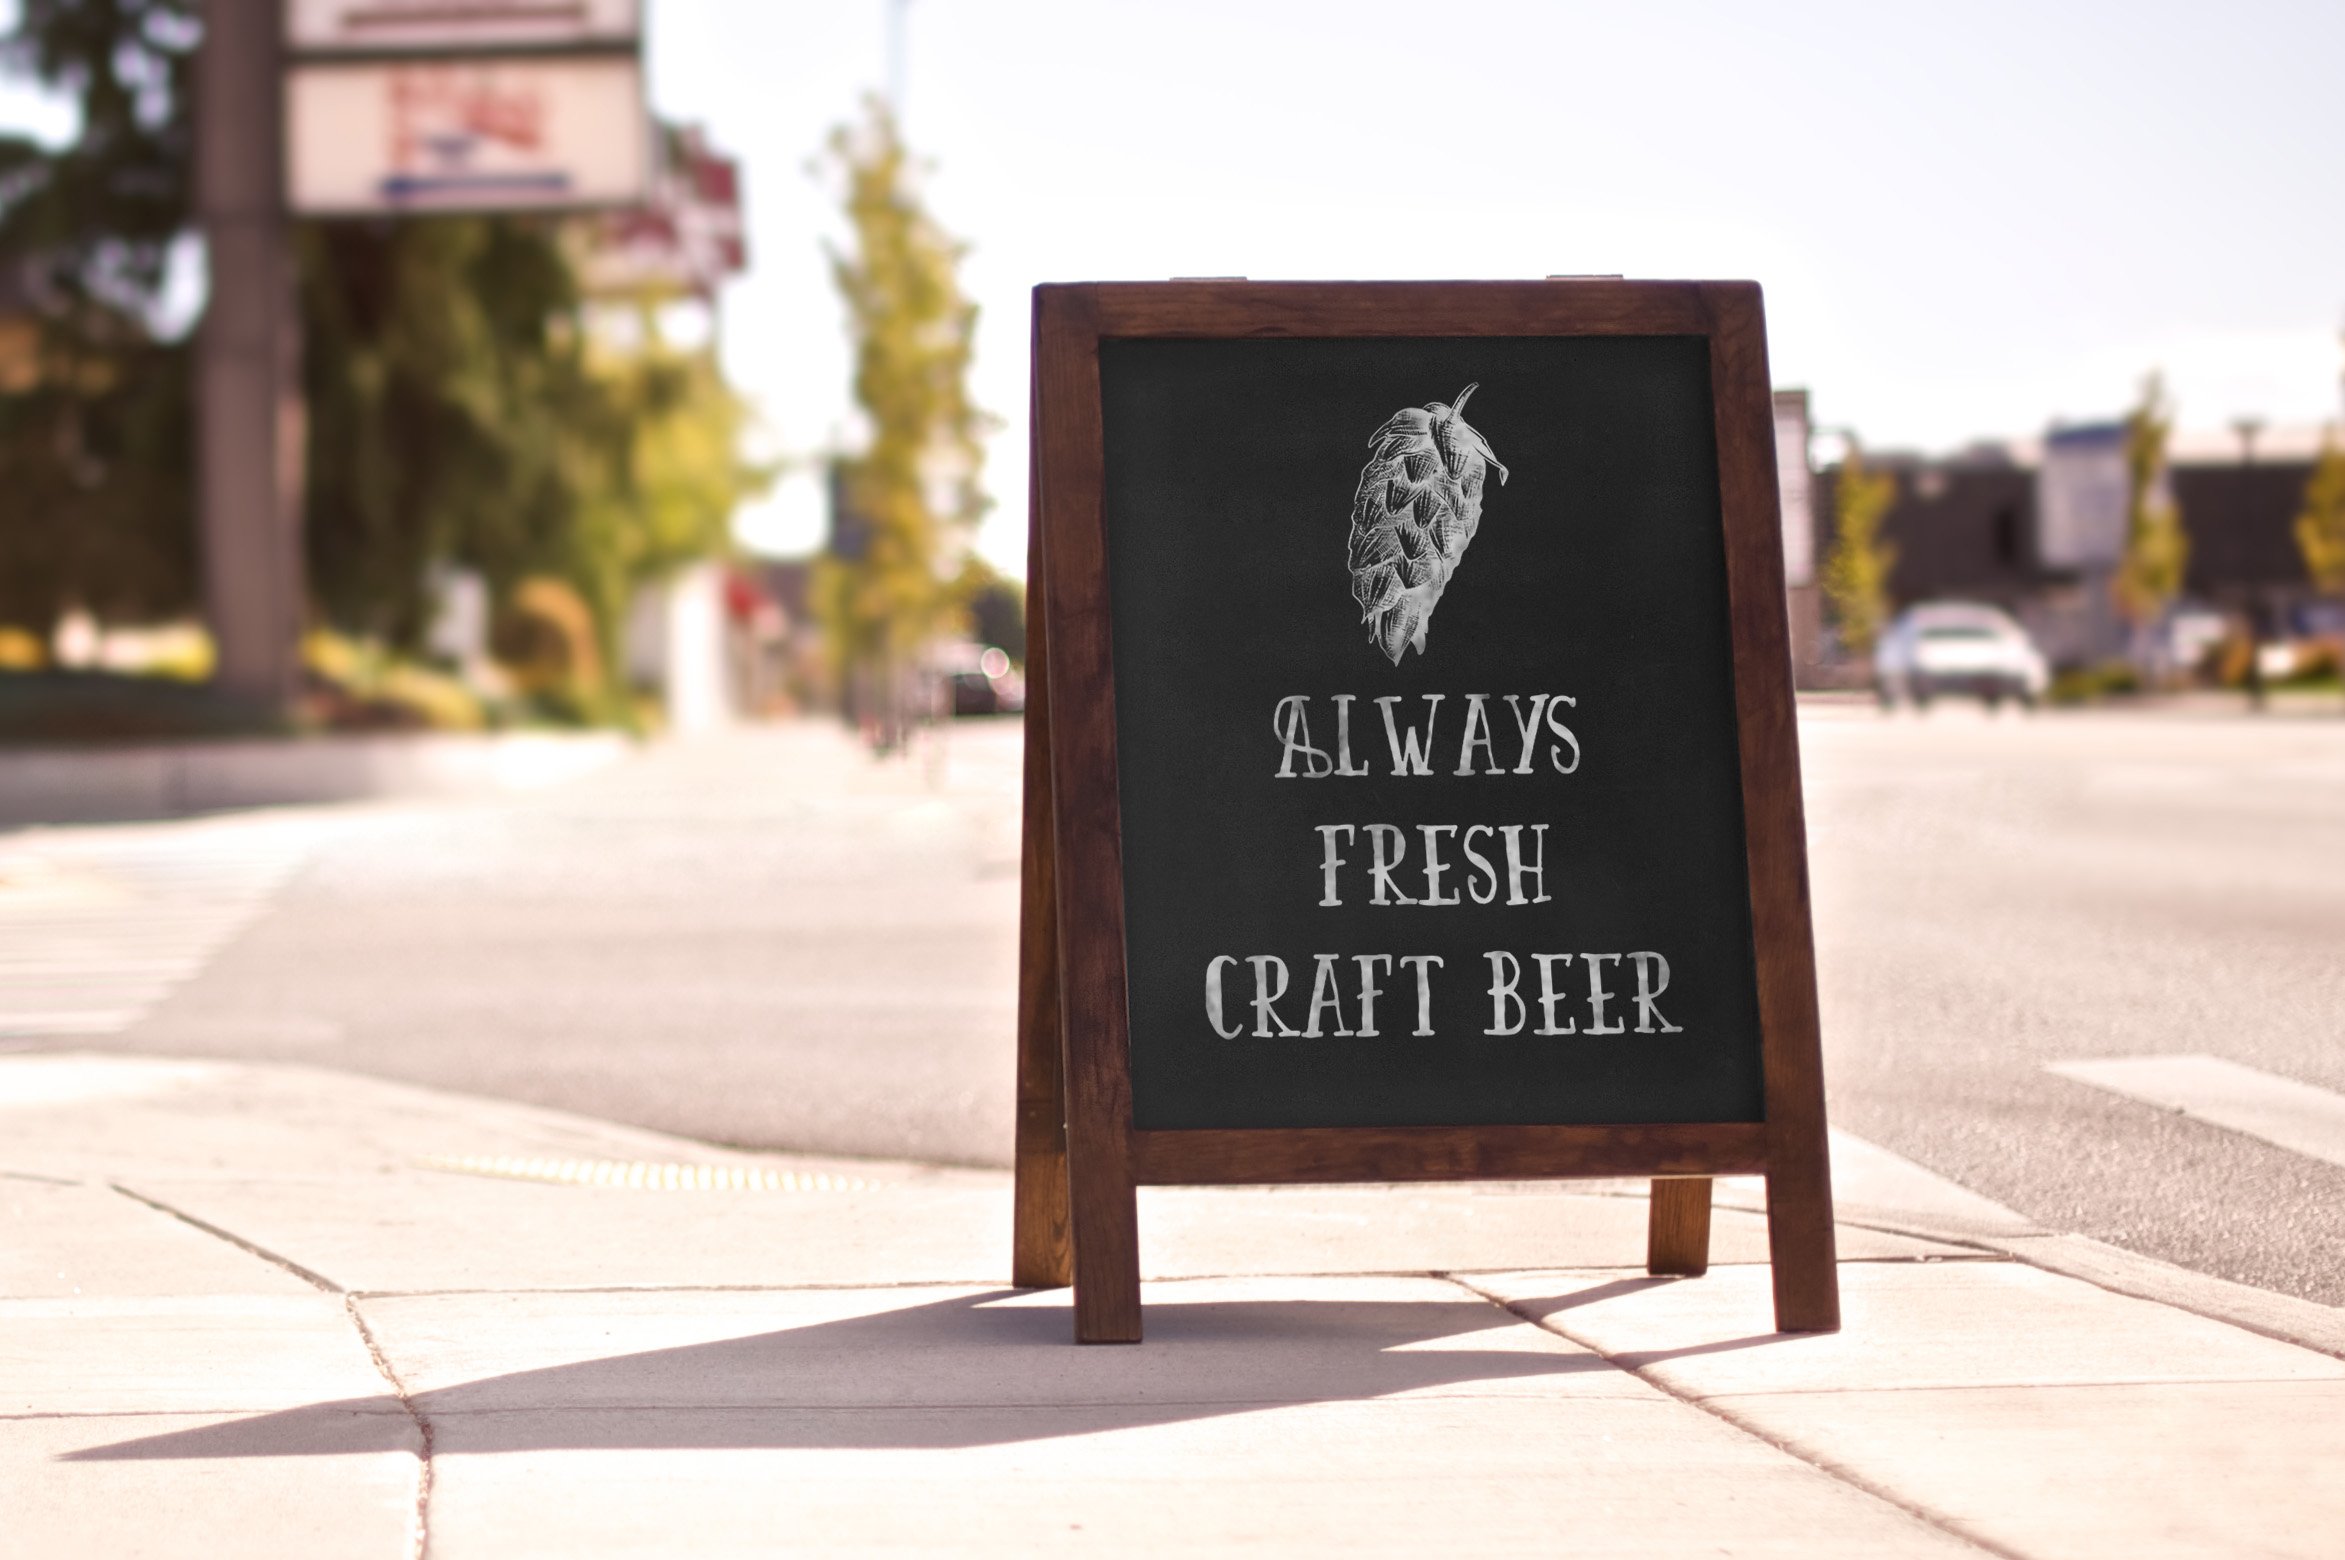 A sign on the side of the road that says always fresh craft beer.